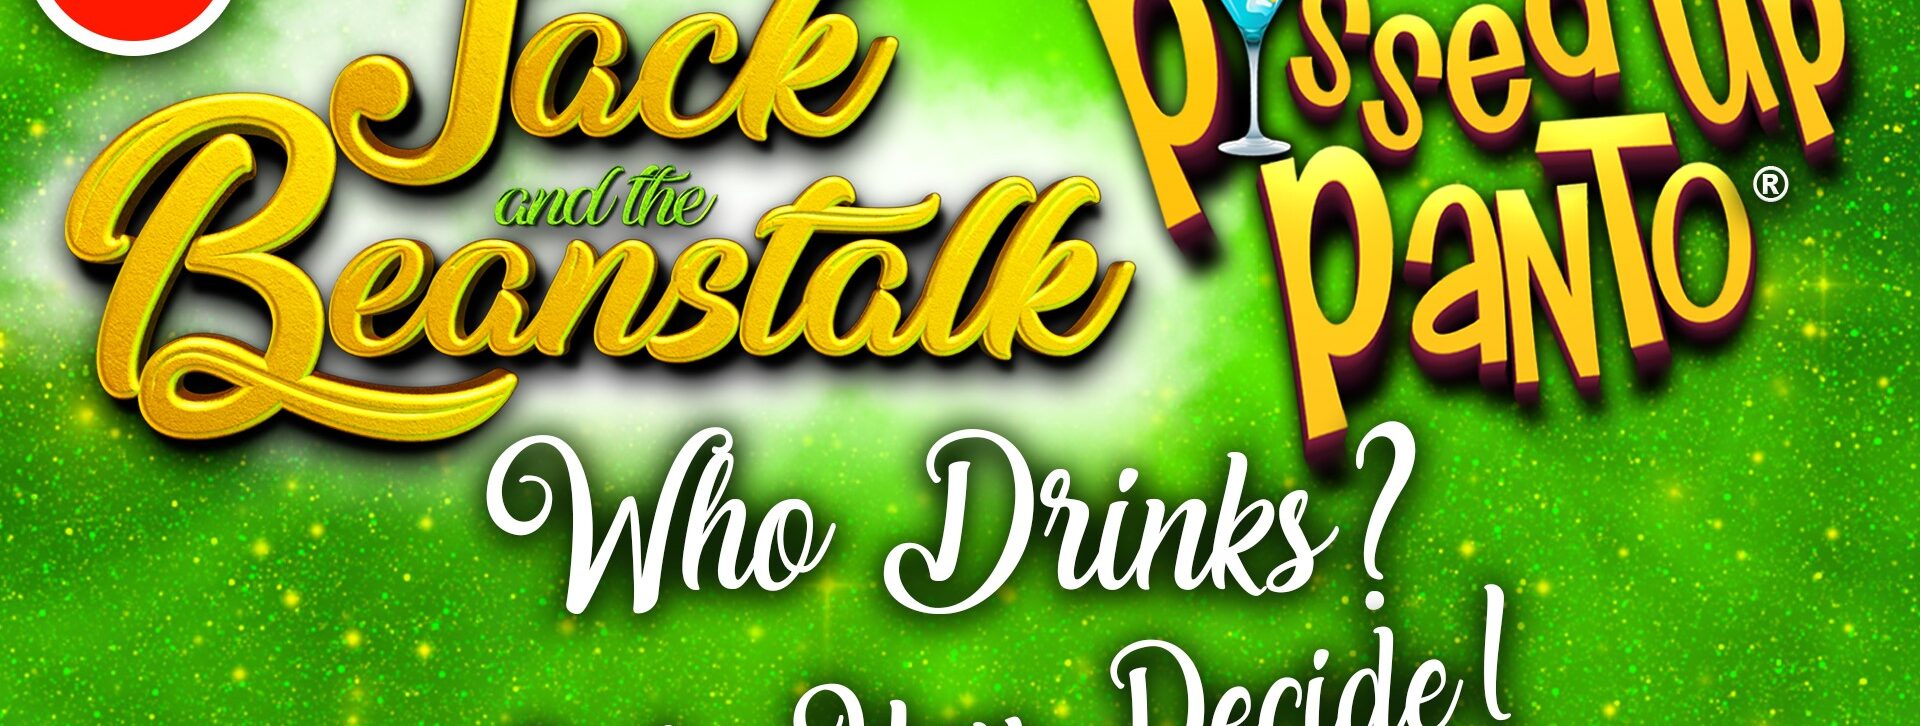 Jack and the Beanstalk: P*ssed Up Panto